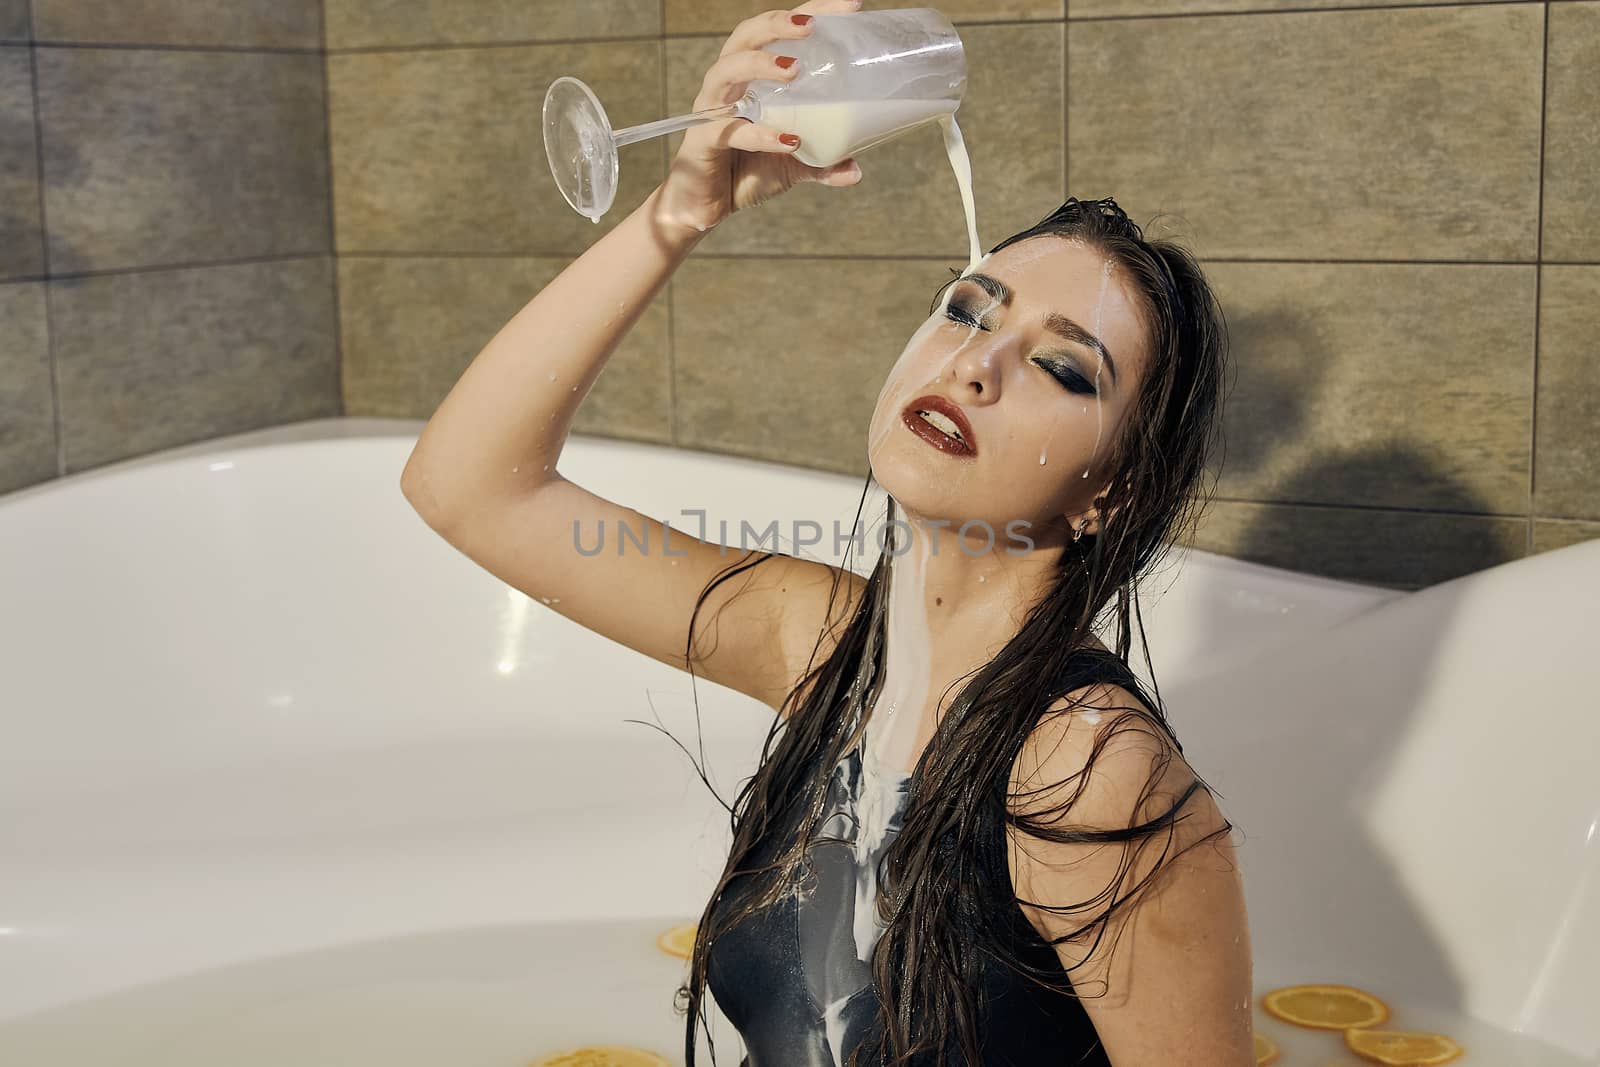 Young woman pours milk on herself. Woman with smeared makeup dressed in the black bathing suit posing in the bath of milk. Conceptual fashion photography for design. Young woman for lifestyle design.